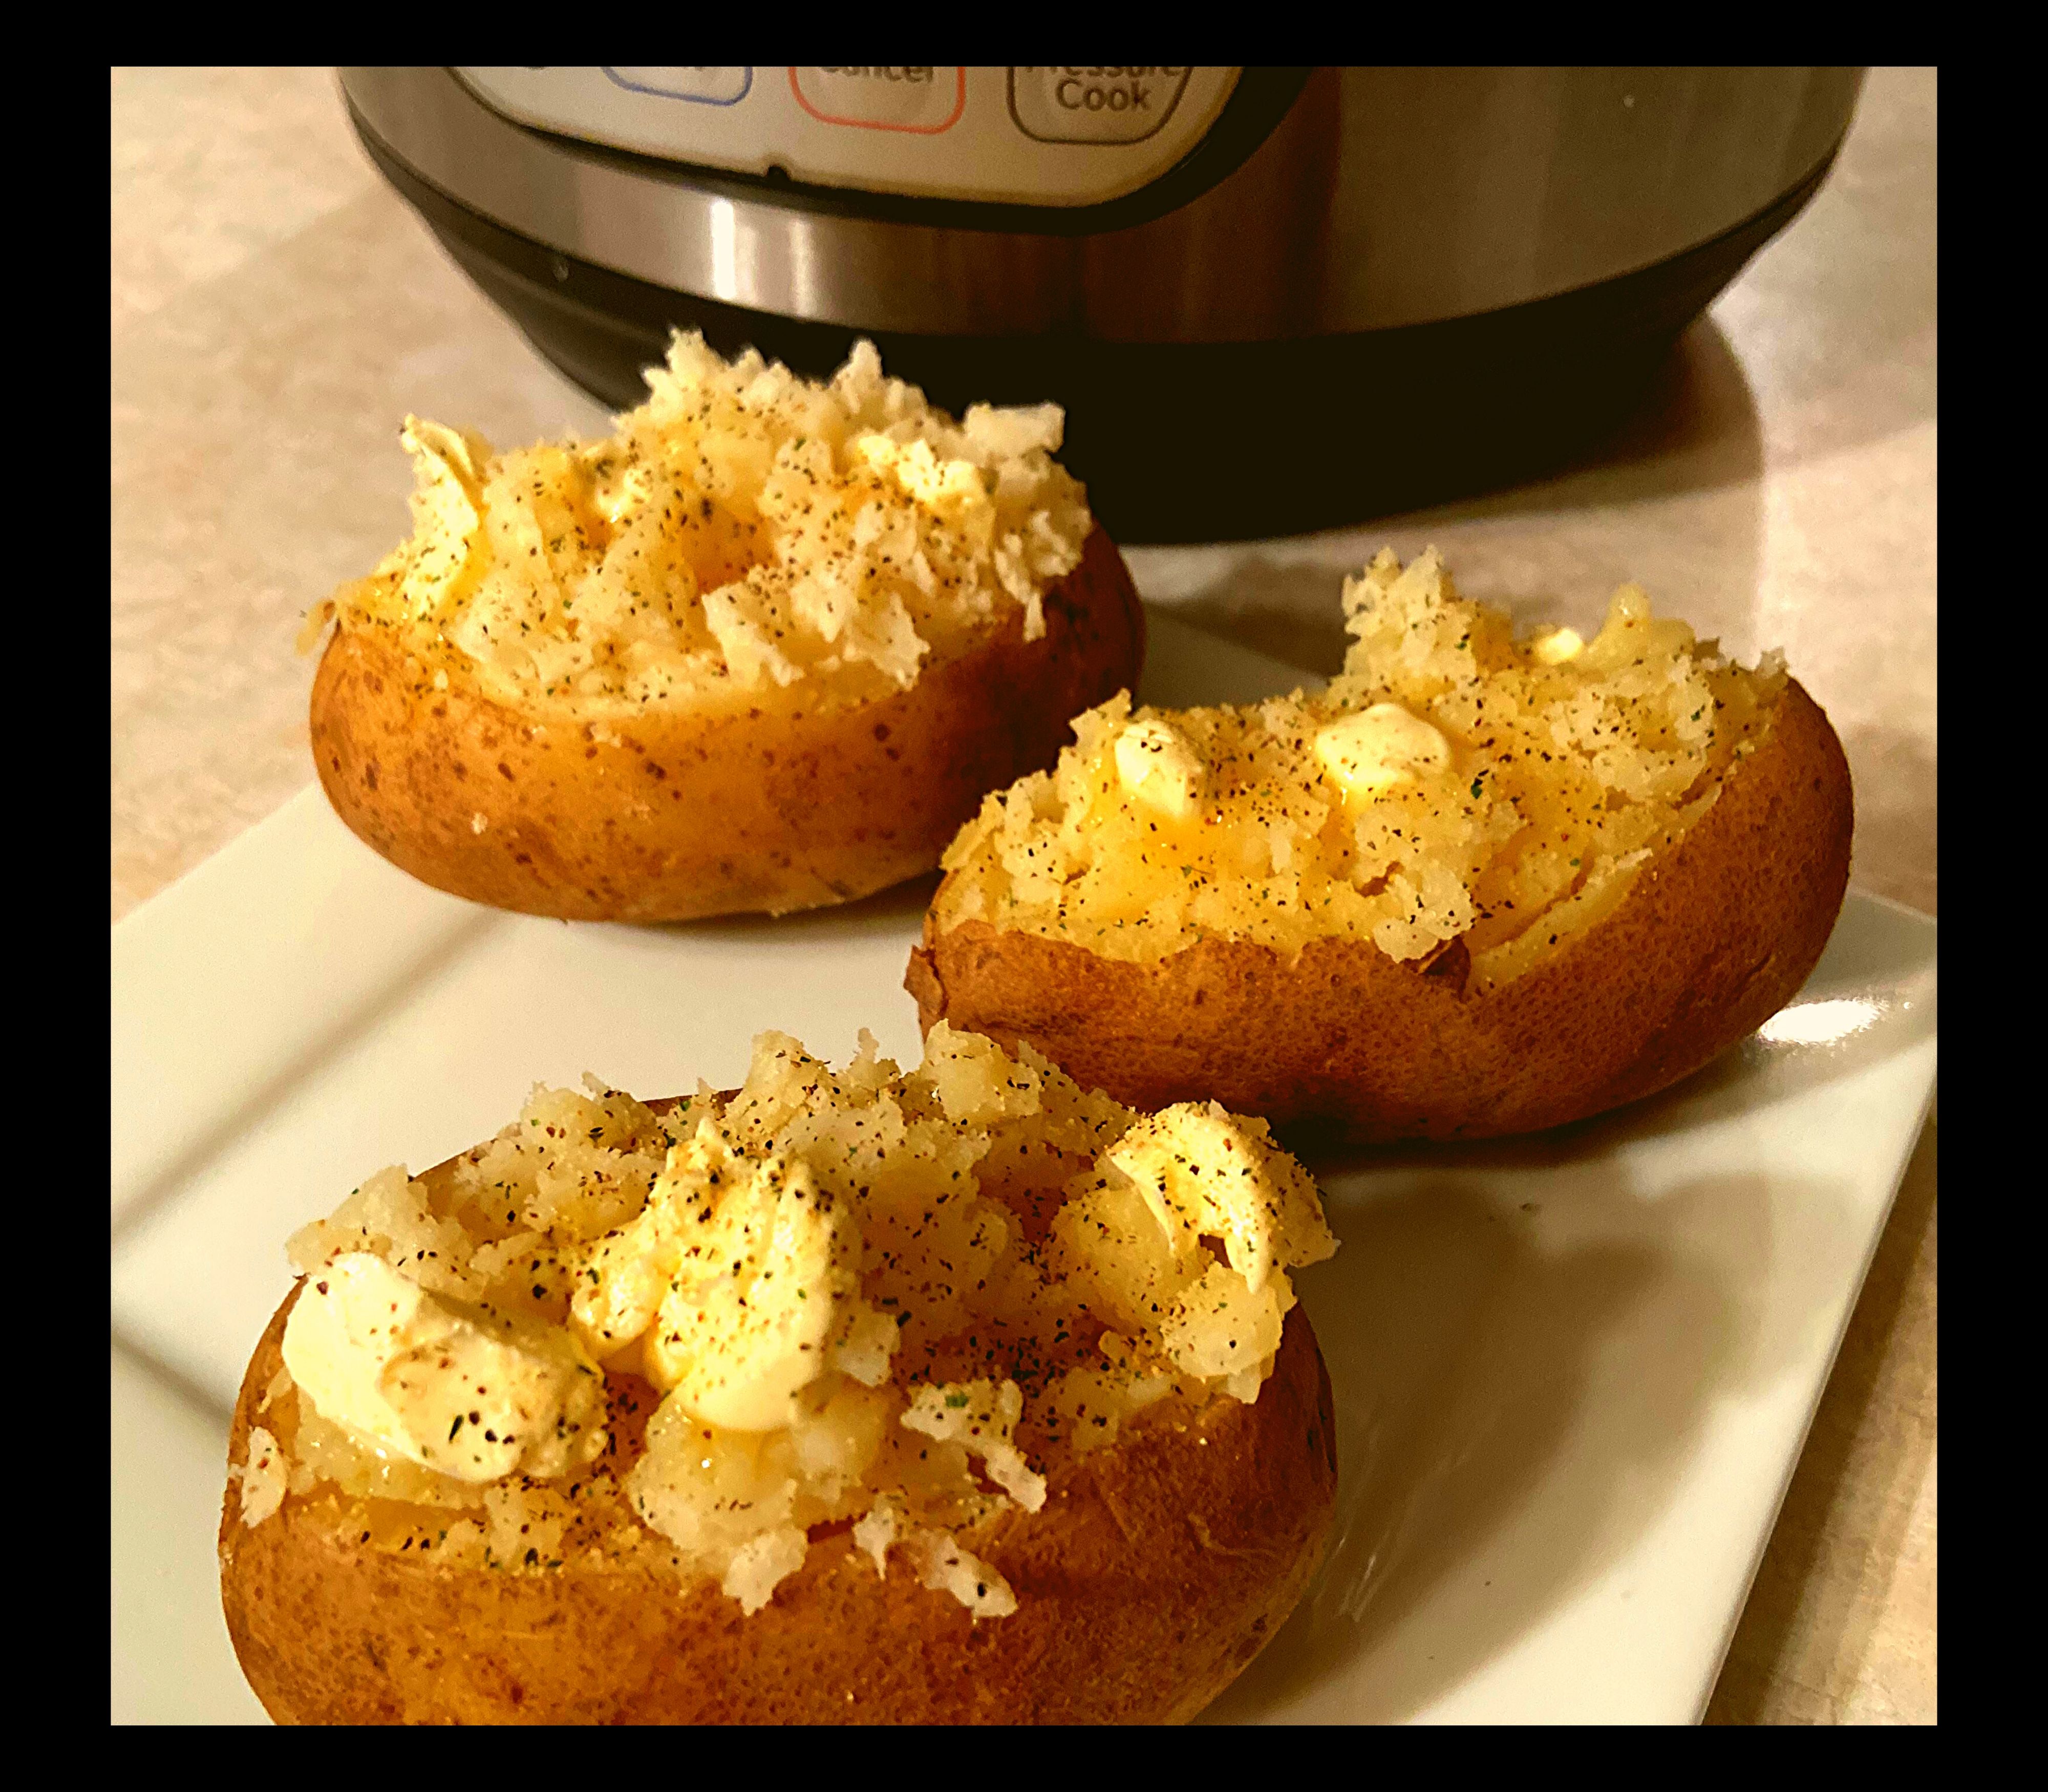 3 Instant Pot Baked Potatoes topped with butter, salt, and pepper on a square white plate sitting in front of an Instant Pot on a kitchen counter.